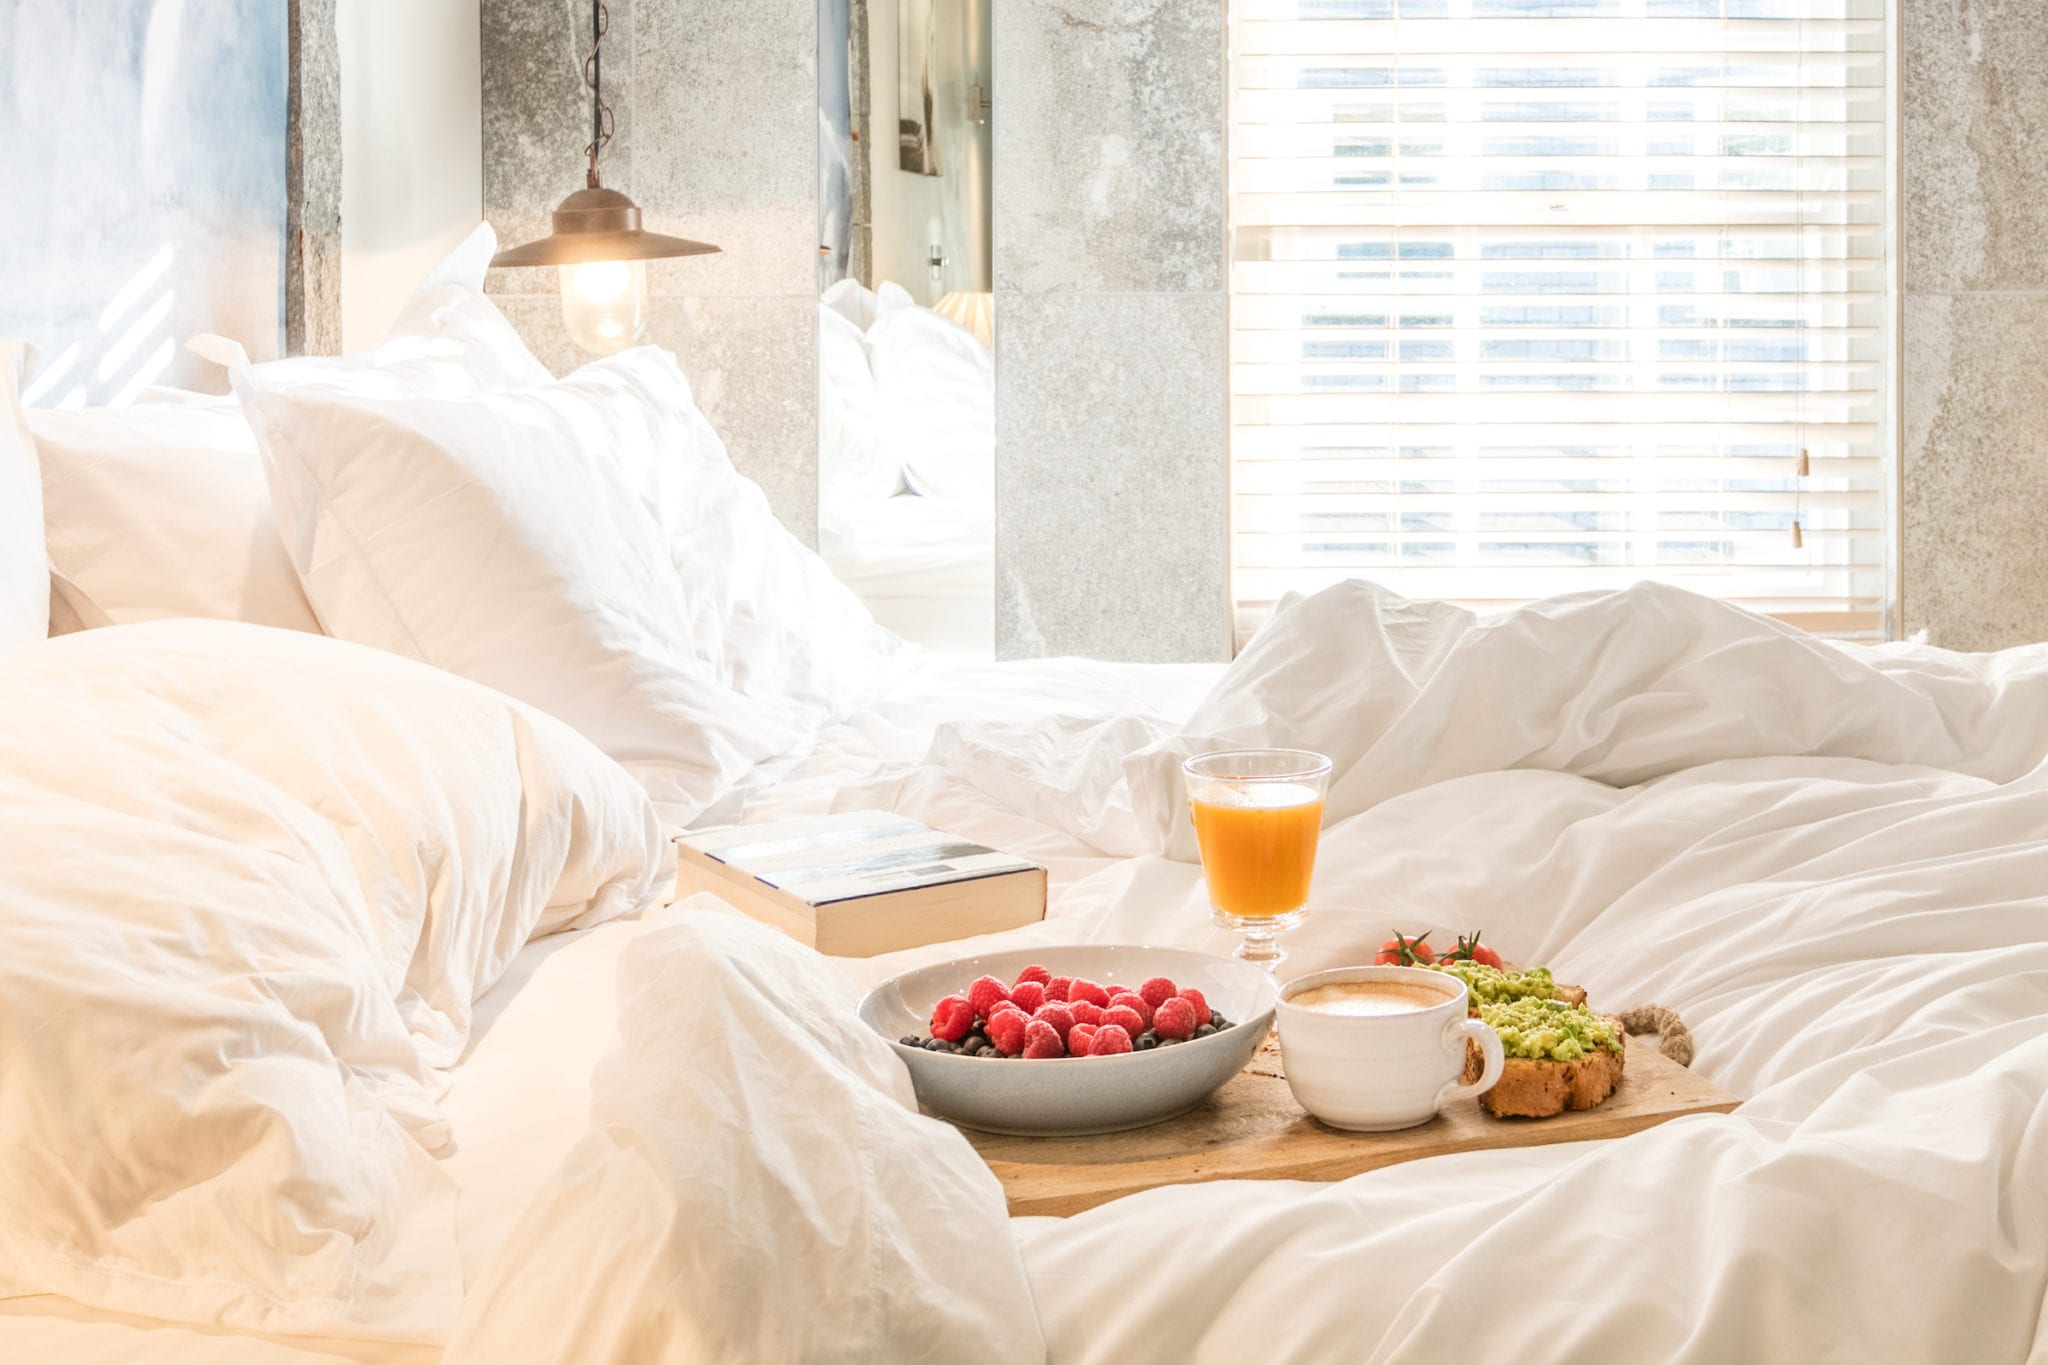 Breakfast in bed by the morning light